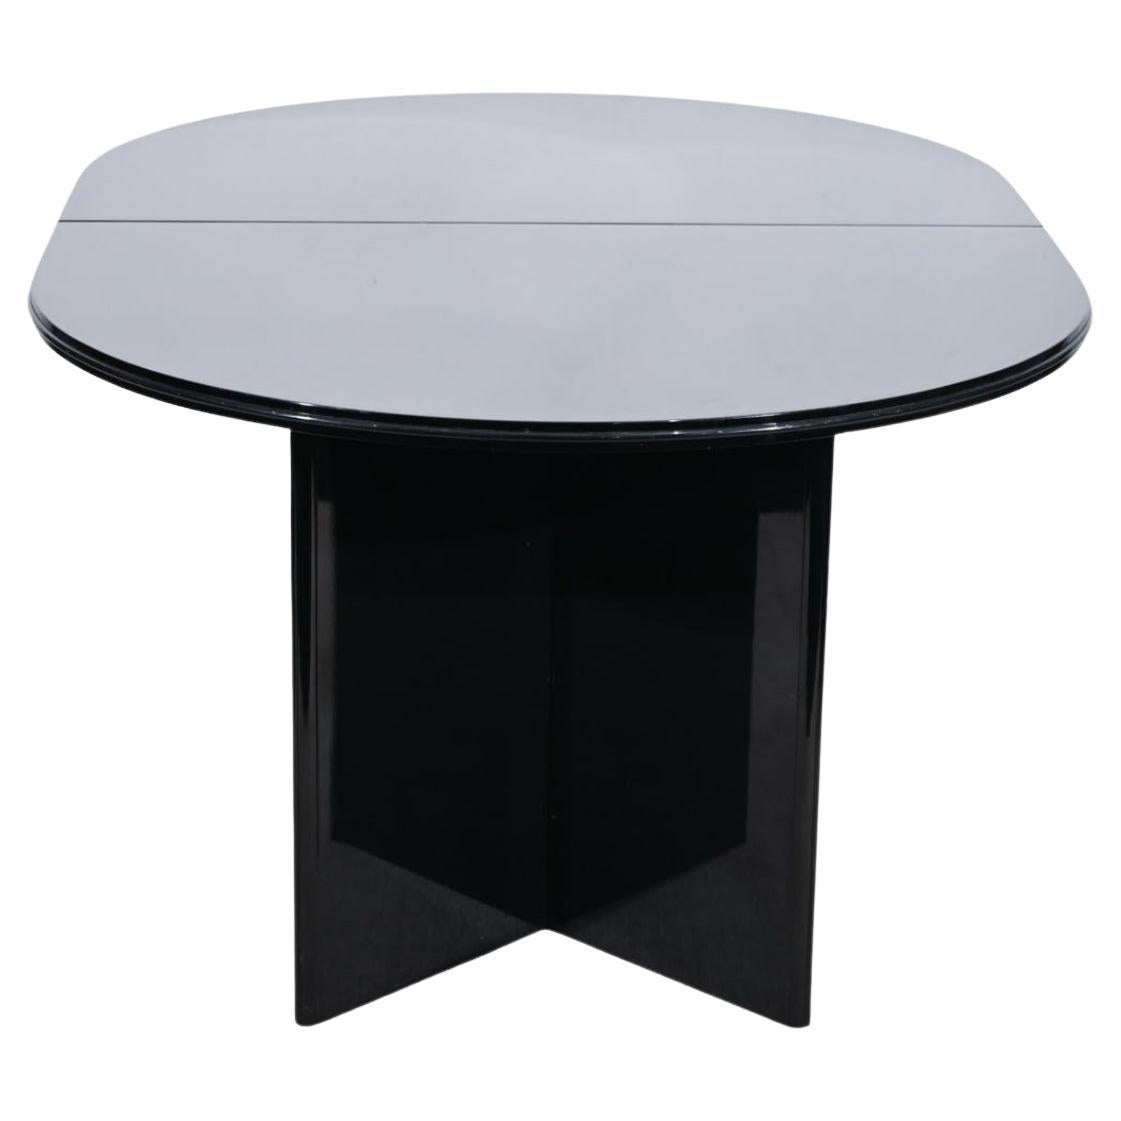 Late 20th Century Post Modern Black Lacquered Double Pedestal Oval Dining Table with Leaf For Sale